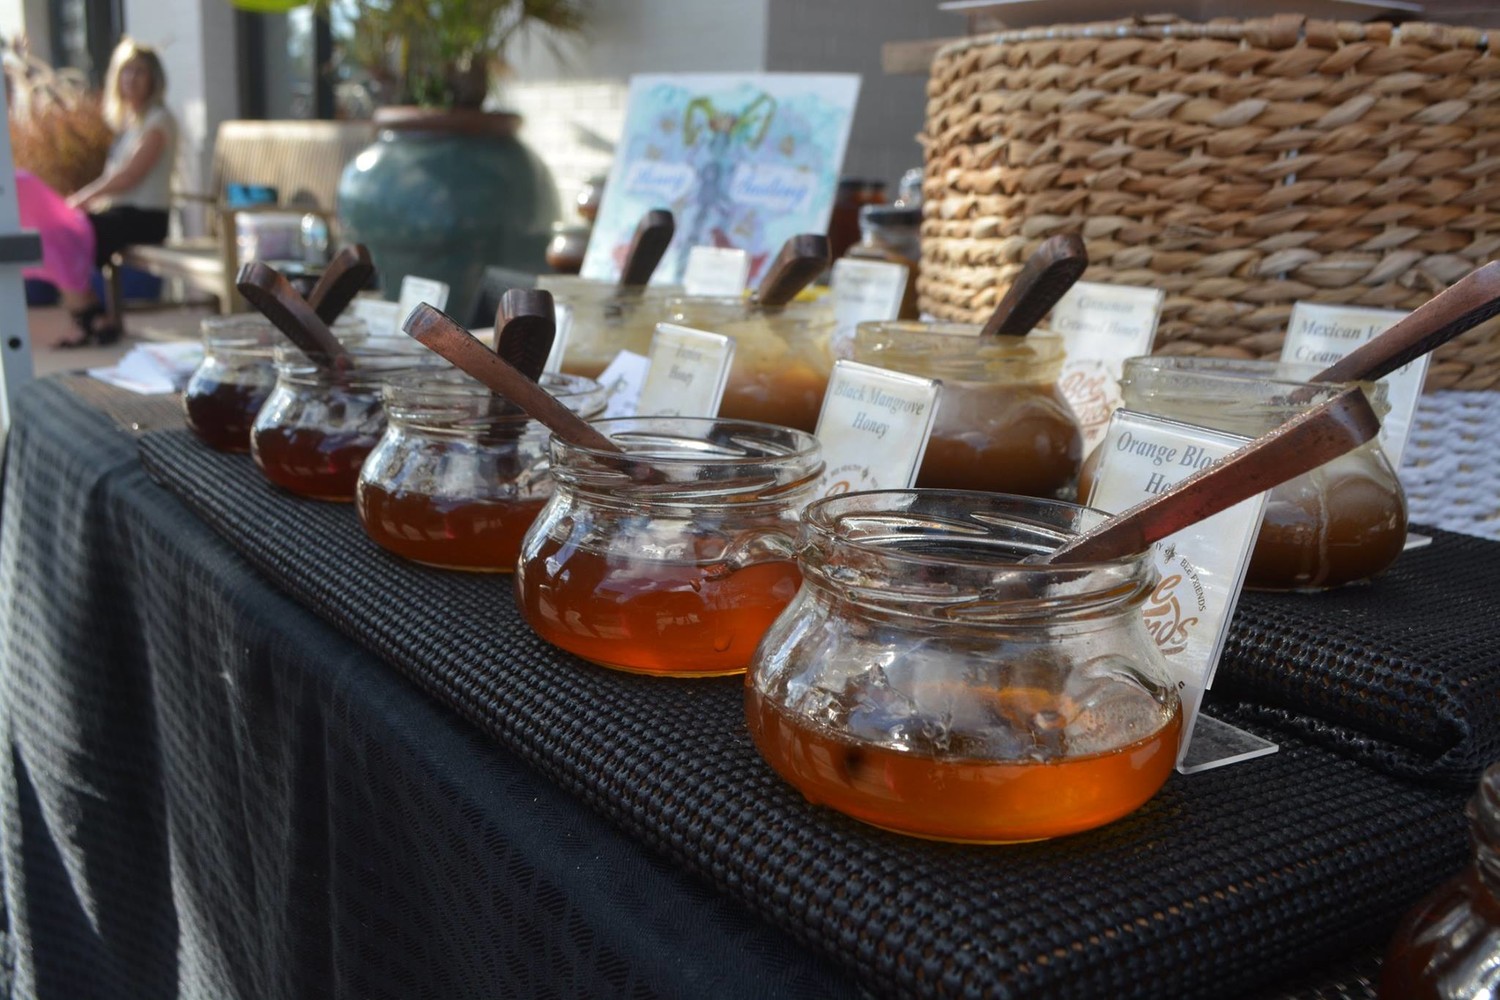 A vendor displays different types of honey at the “Oh What FUN!” Christmas celebration.